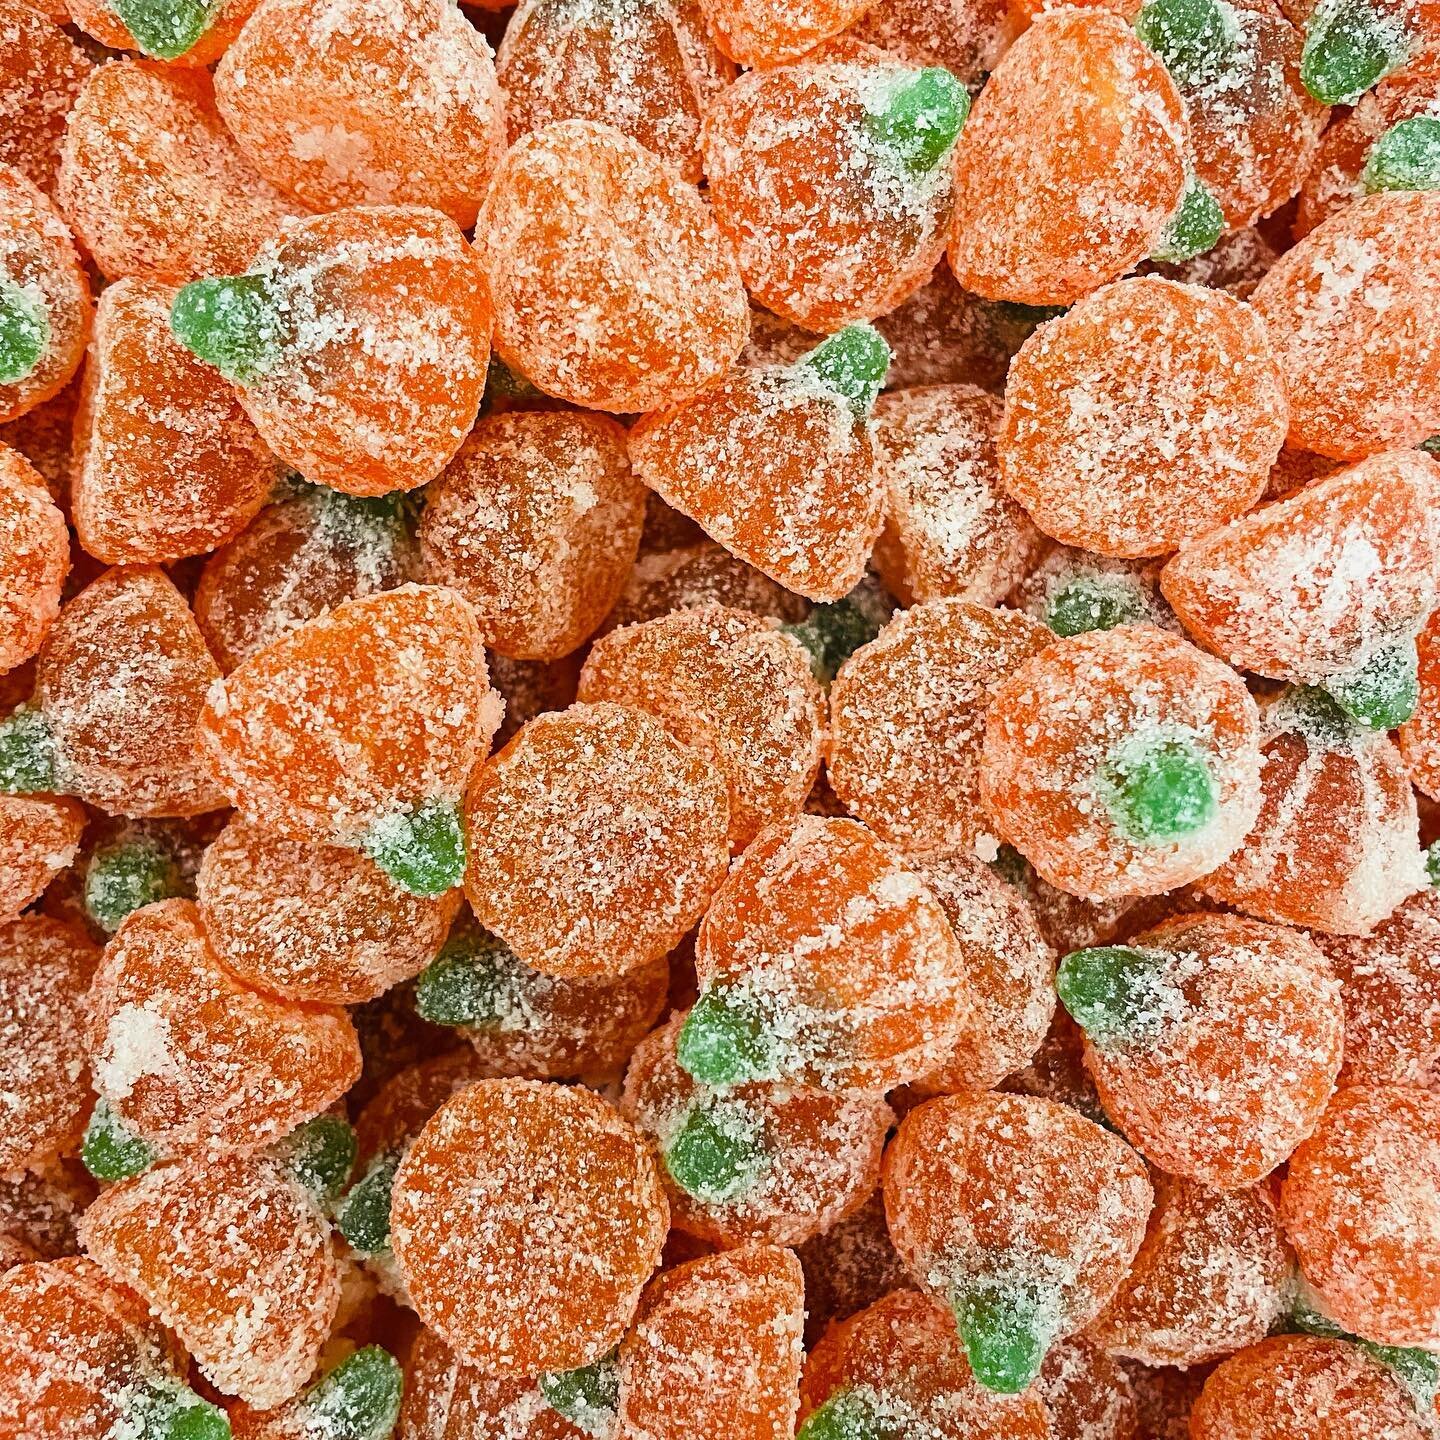 Sour Gummi Pumpkins 🎃 Have you checked out our new fall store hours? Monday, Tuesday, and Wednesday open 10am-6pm. Thursday, Friday, Saturday open 10am-8pm. Sundays Closed. Thank you for shopping local with us!! #hollandpeanutstore #familybusiness #